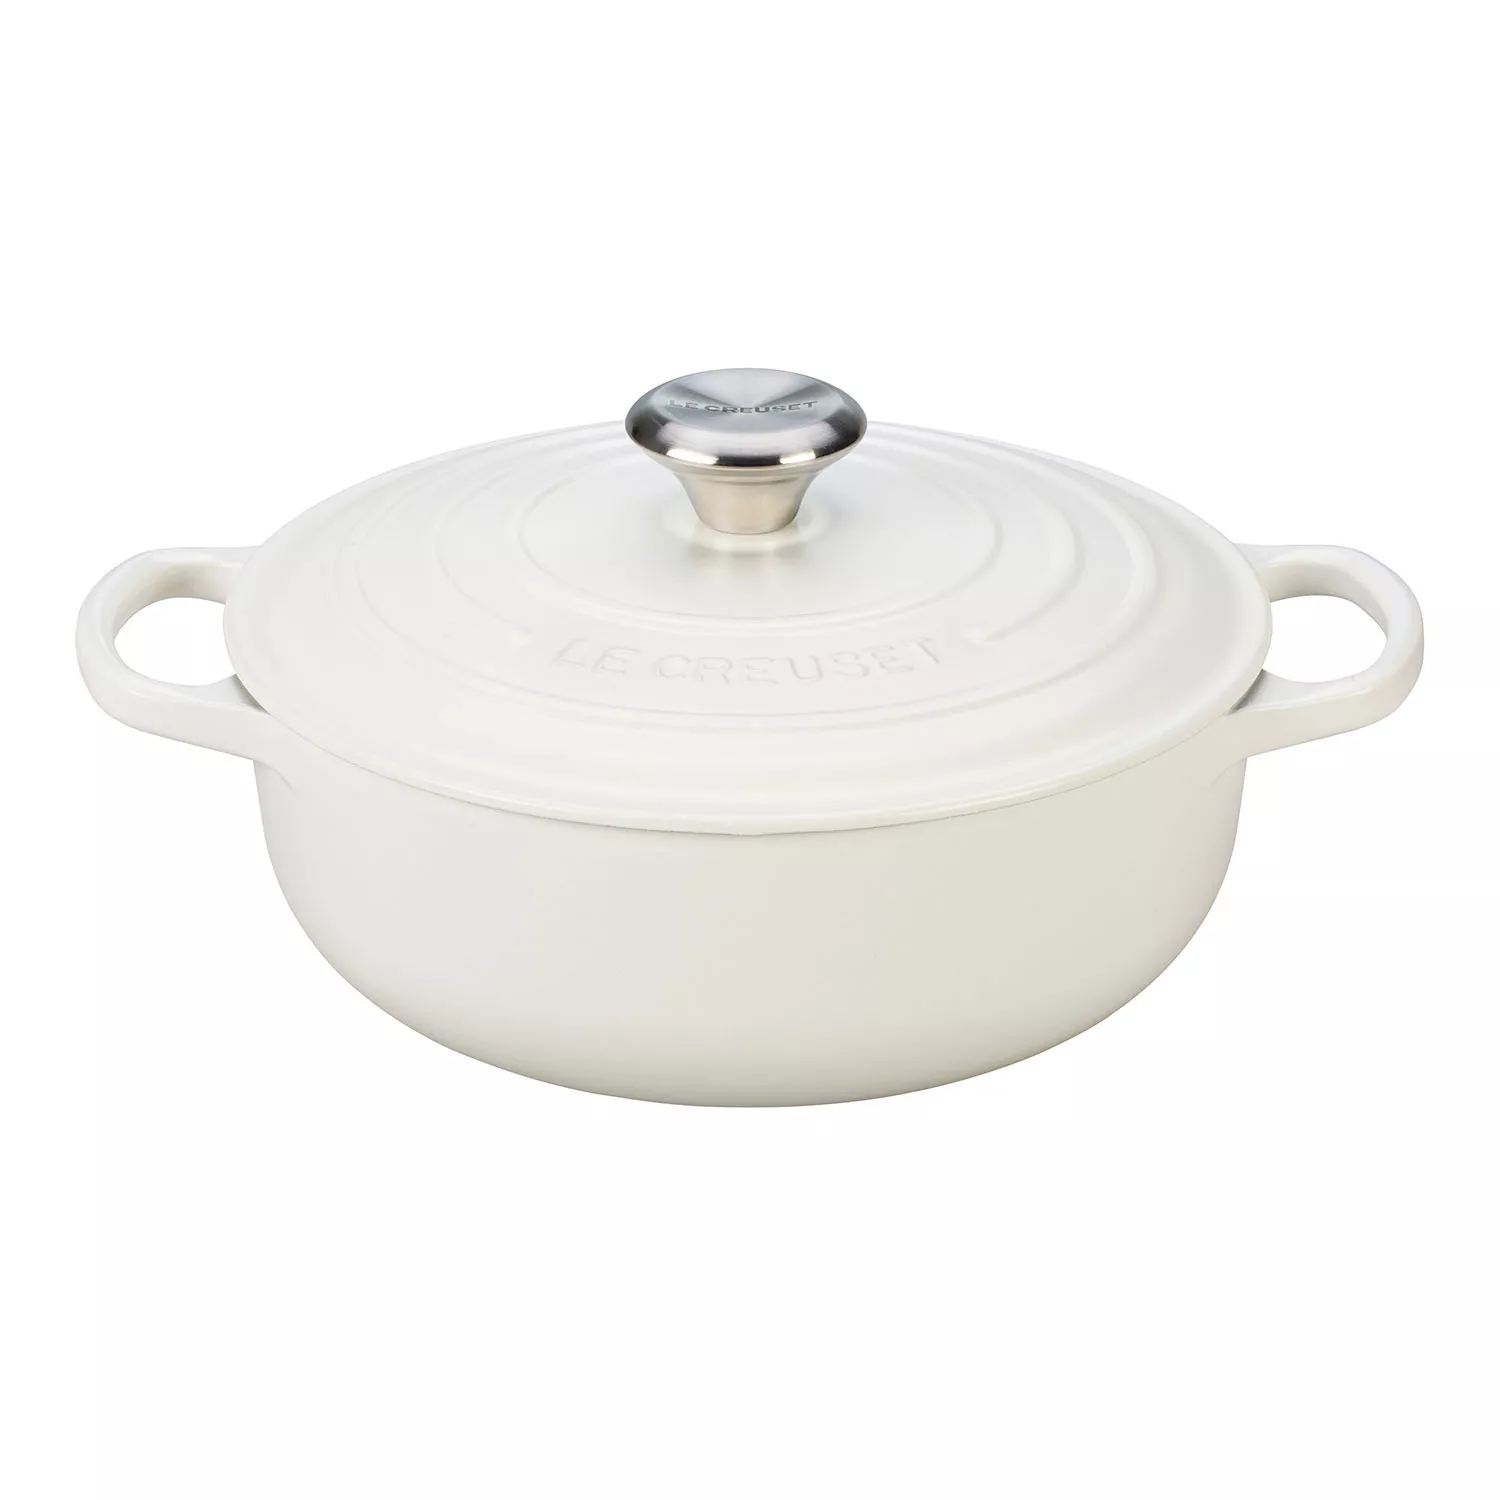 Le Creuset - A top pick from our Winter Savings Event, this 4.5 qt. Classic  Stainless Steel Wok is easy to use and exceptionally versatile. Head over  to our website to see